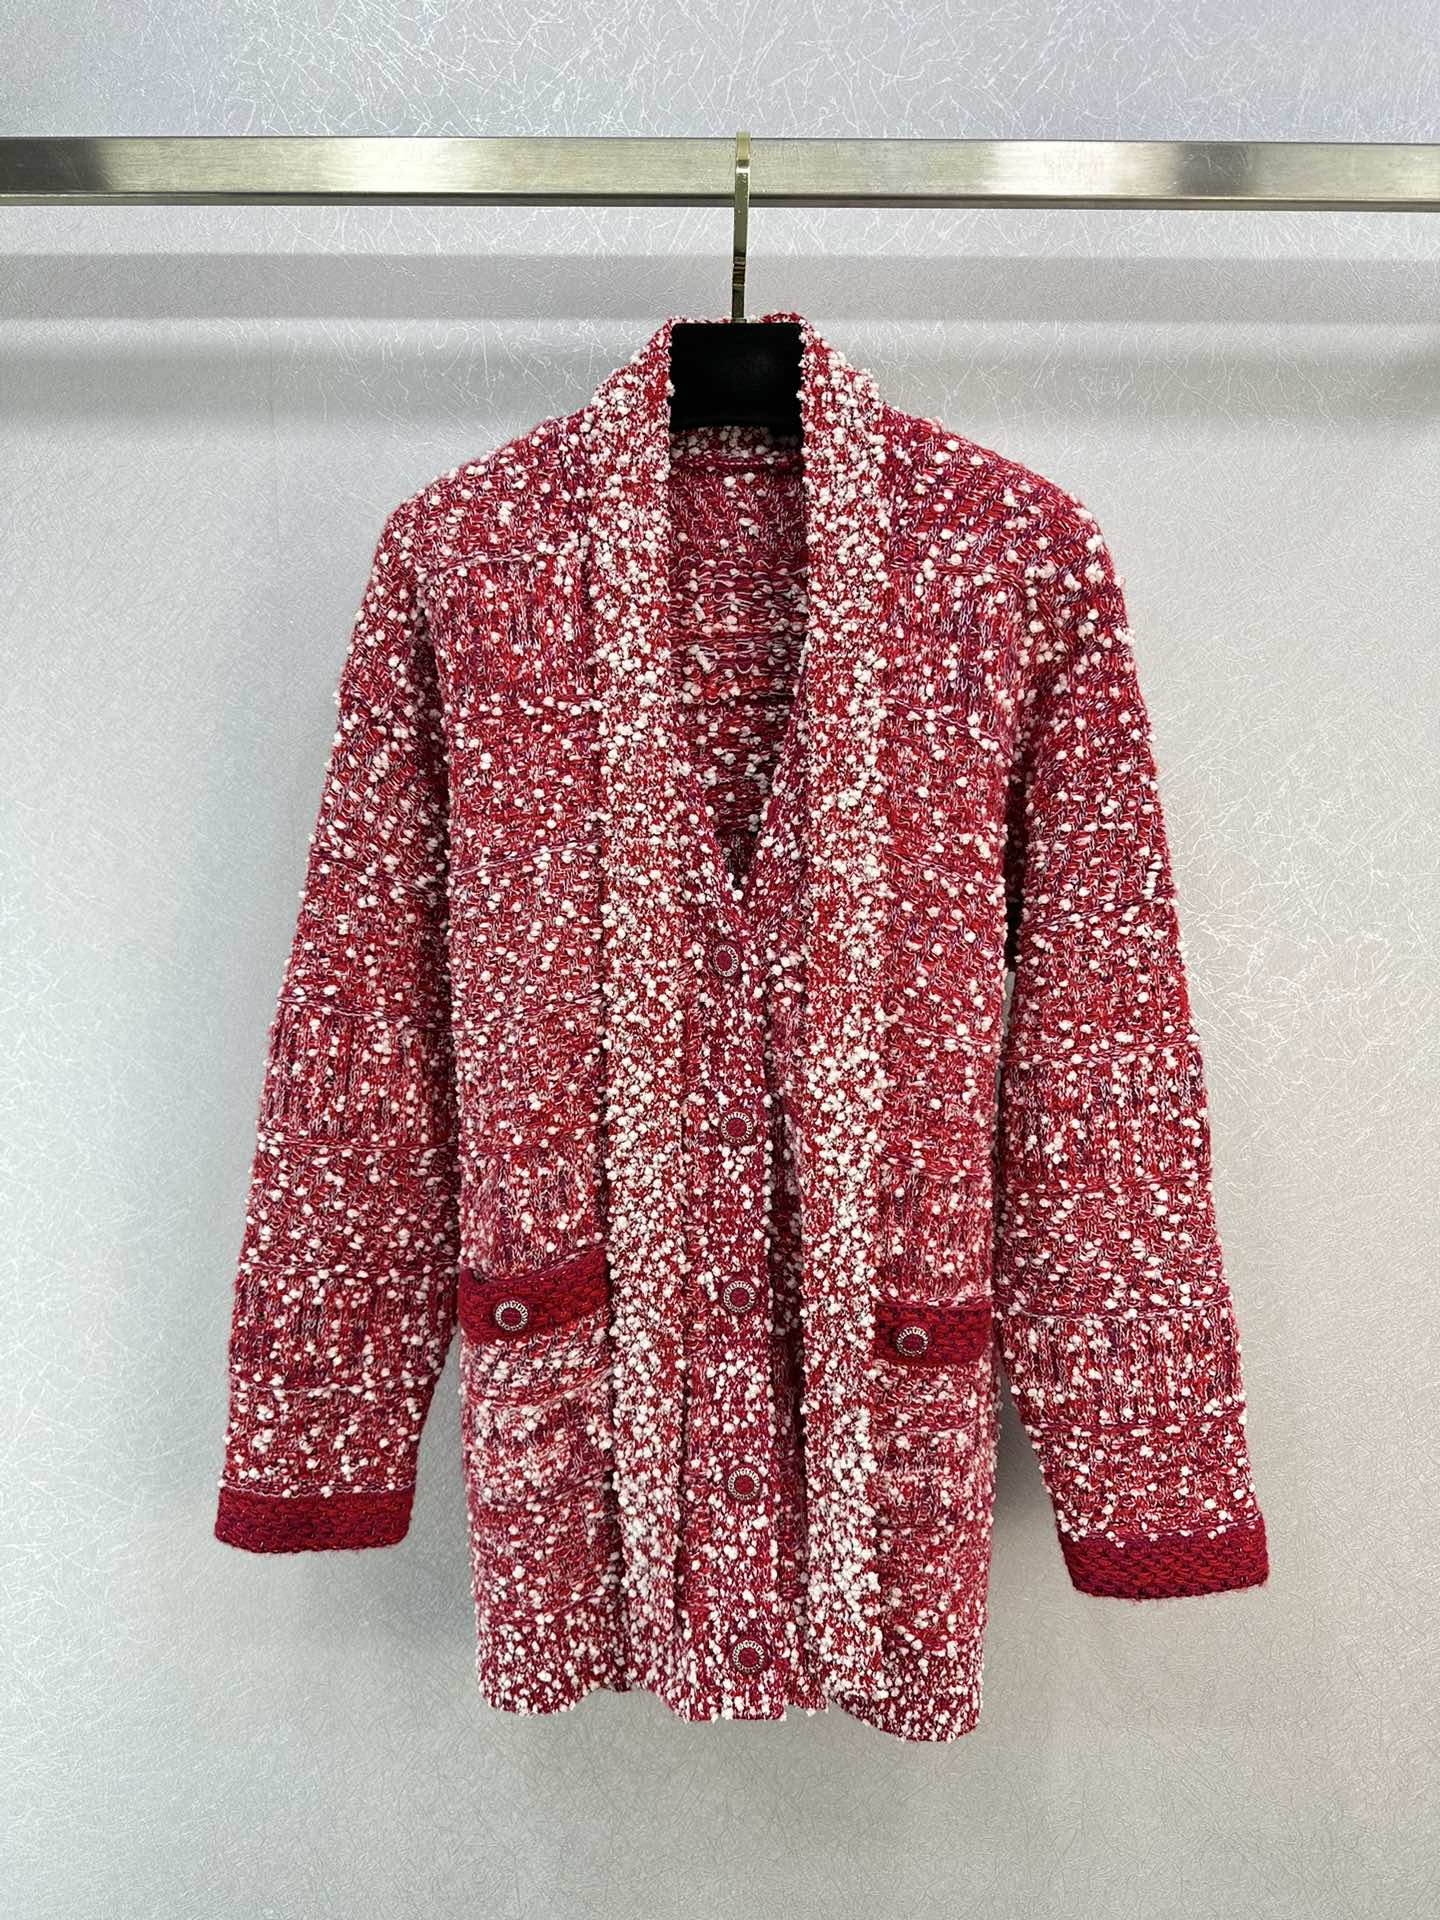 Chanel Clothing Cardigans Coats & Jackets Red White Knitting Fall/Winter Collection